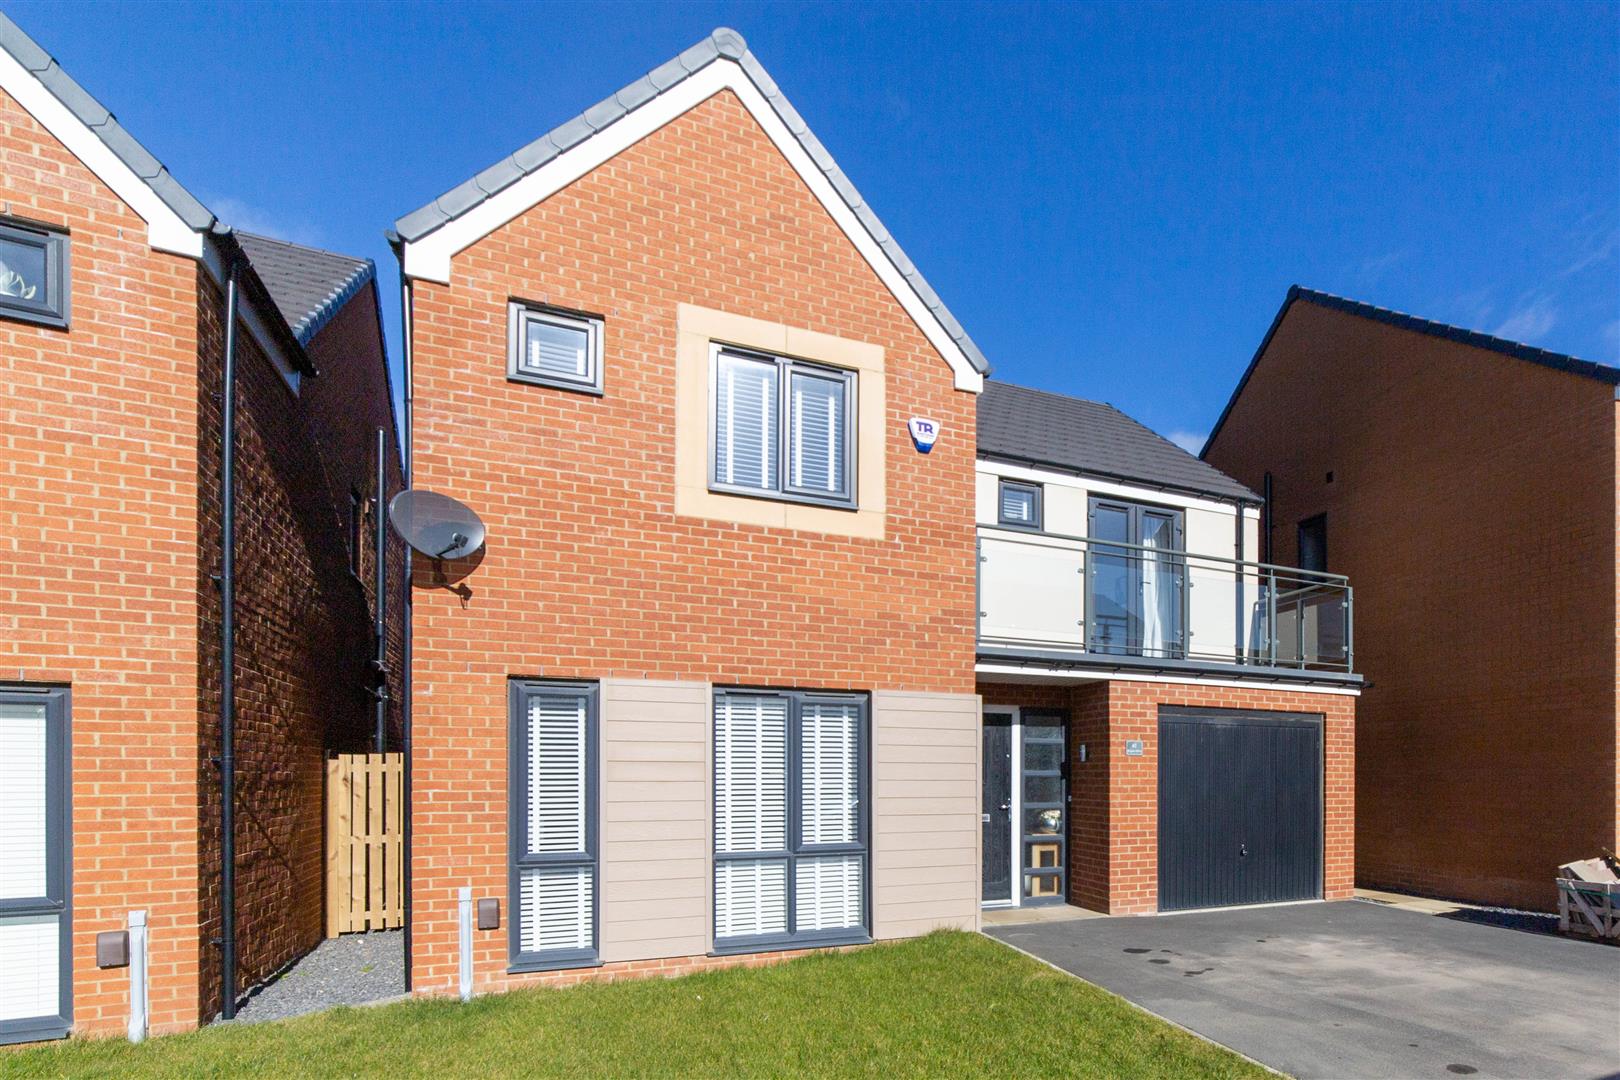 4 bed detached house for sale in Ringlet Drive, Great Park, NE13